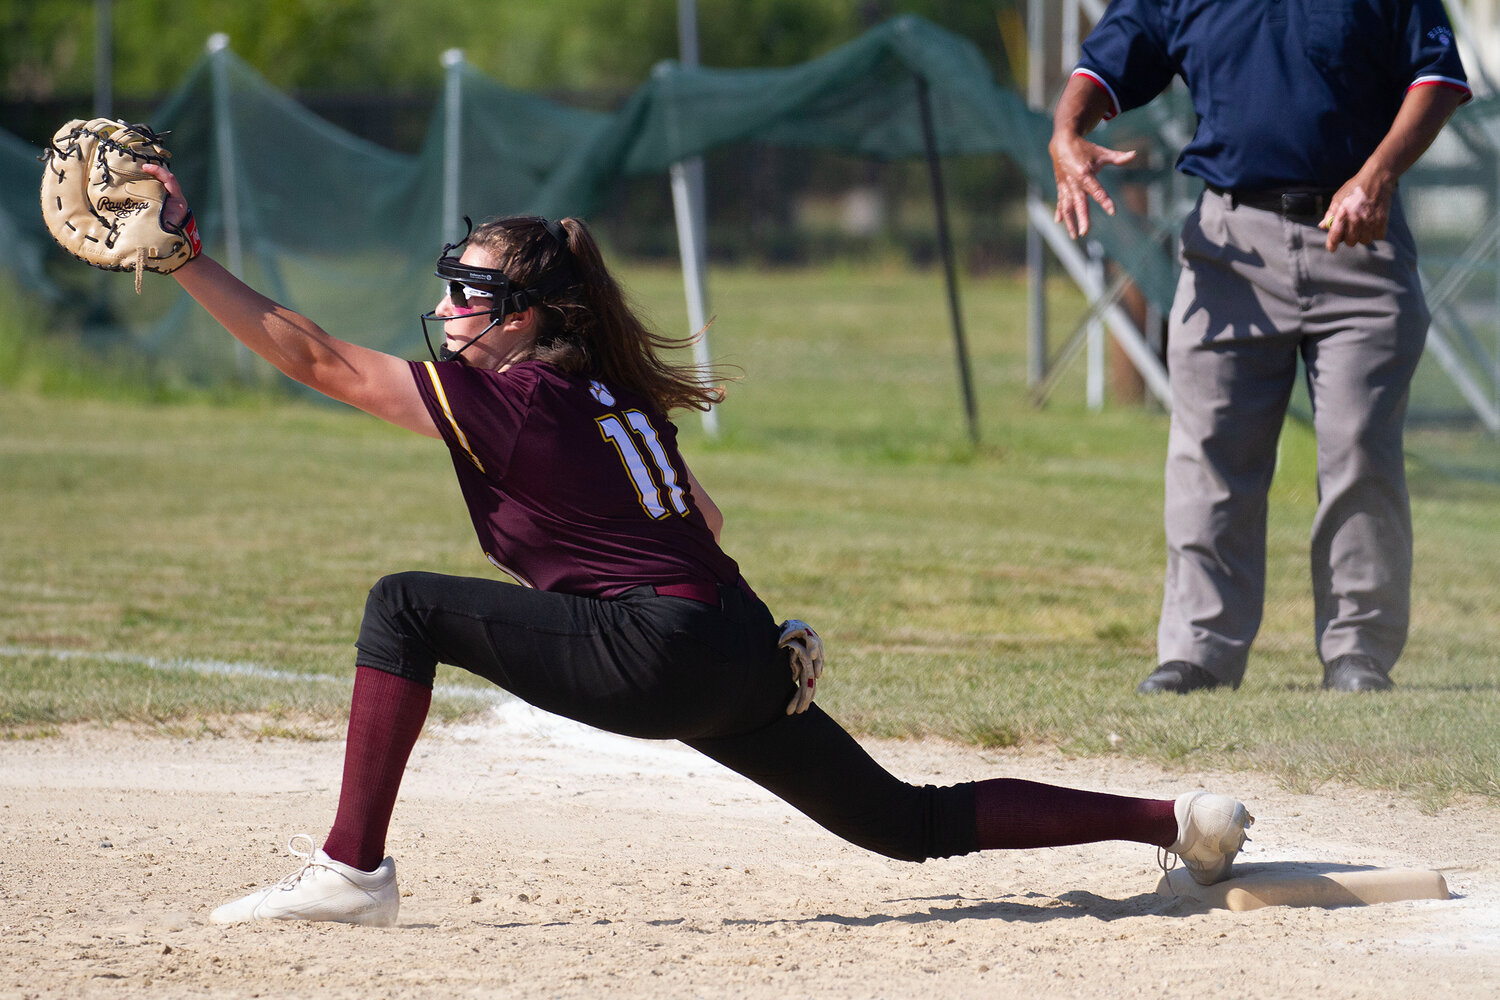 First baseman Abby Monkevicz stretches to make an catch for an out.